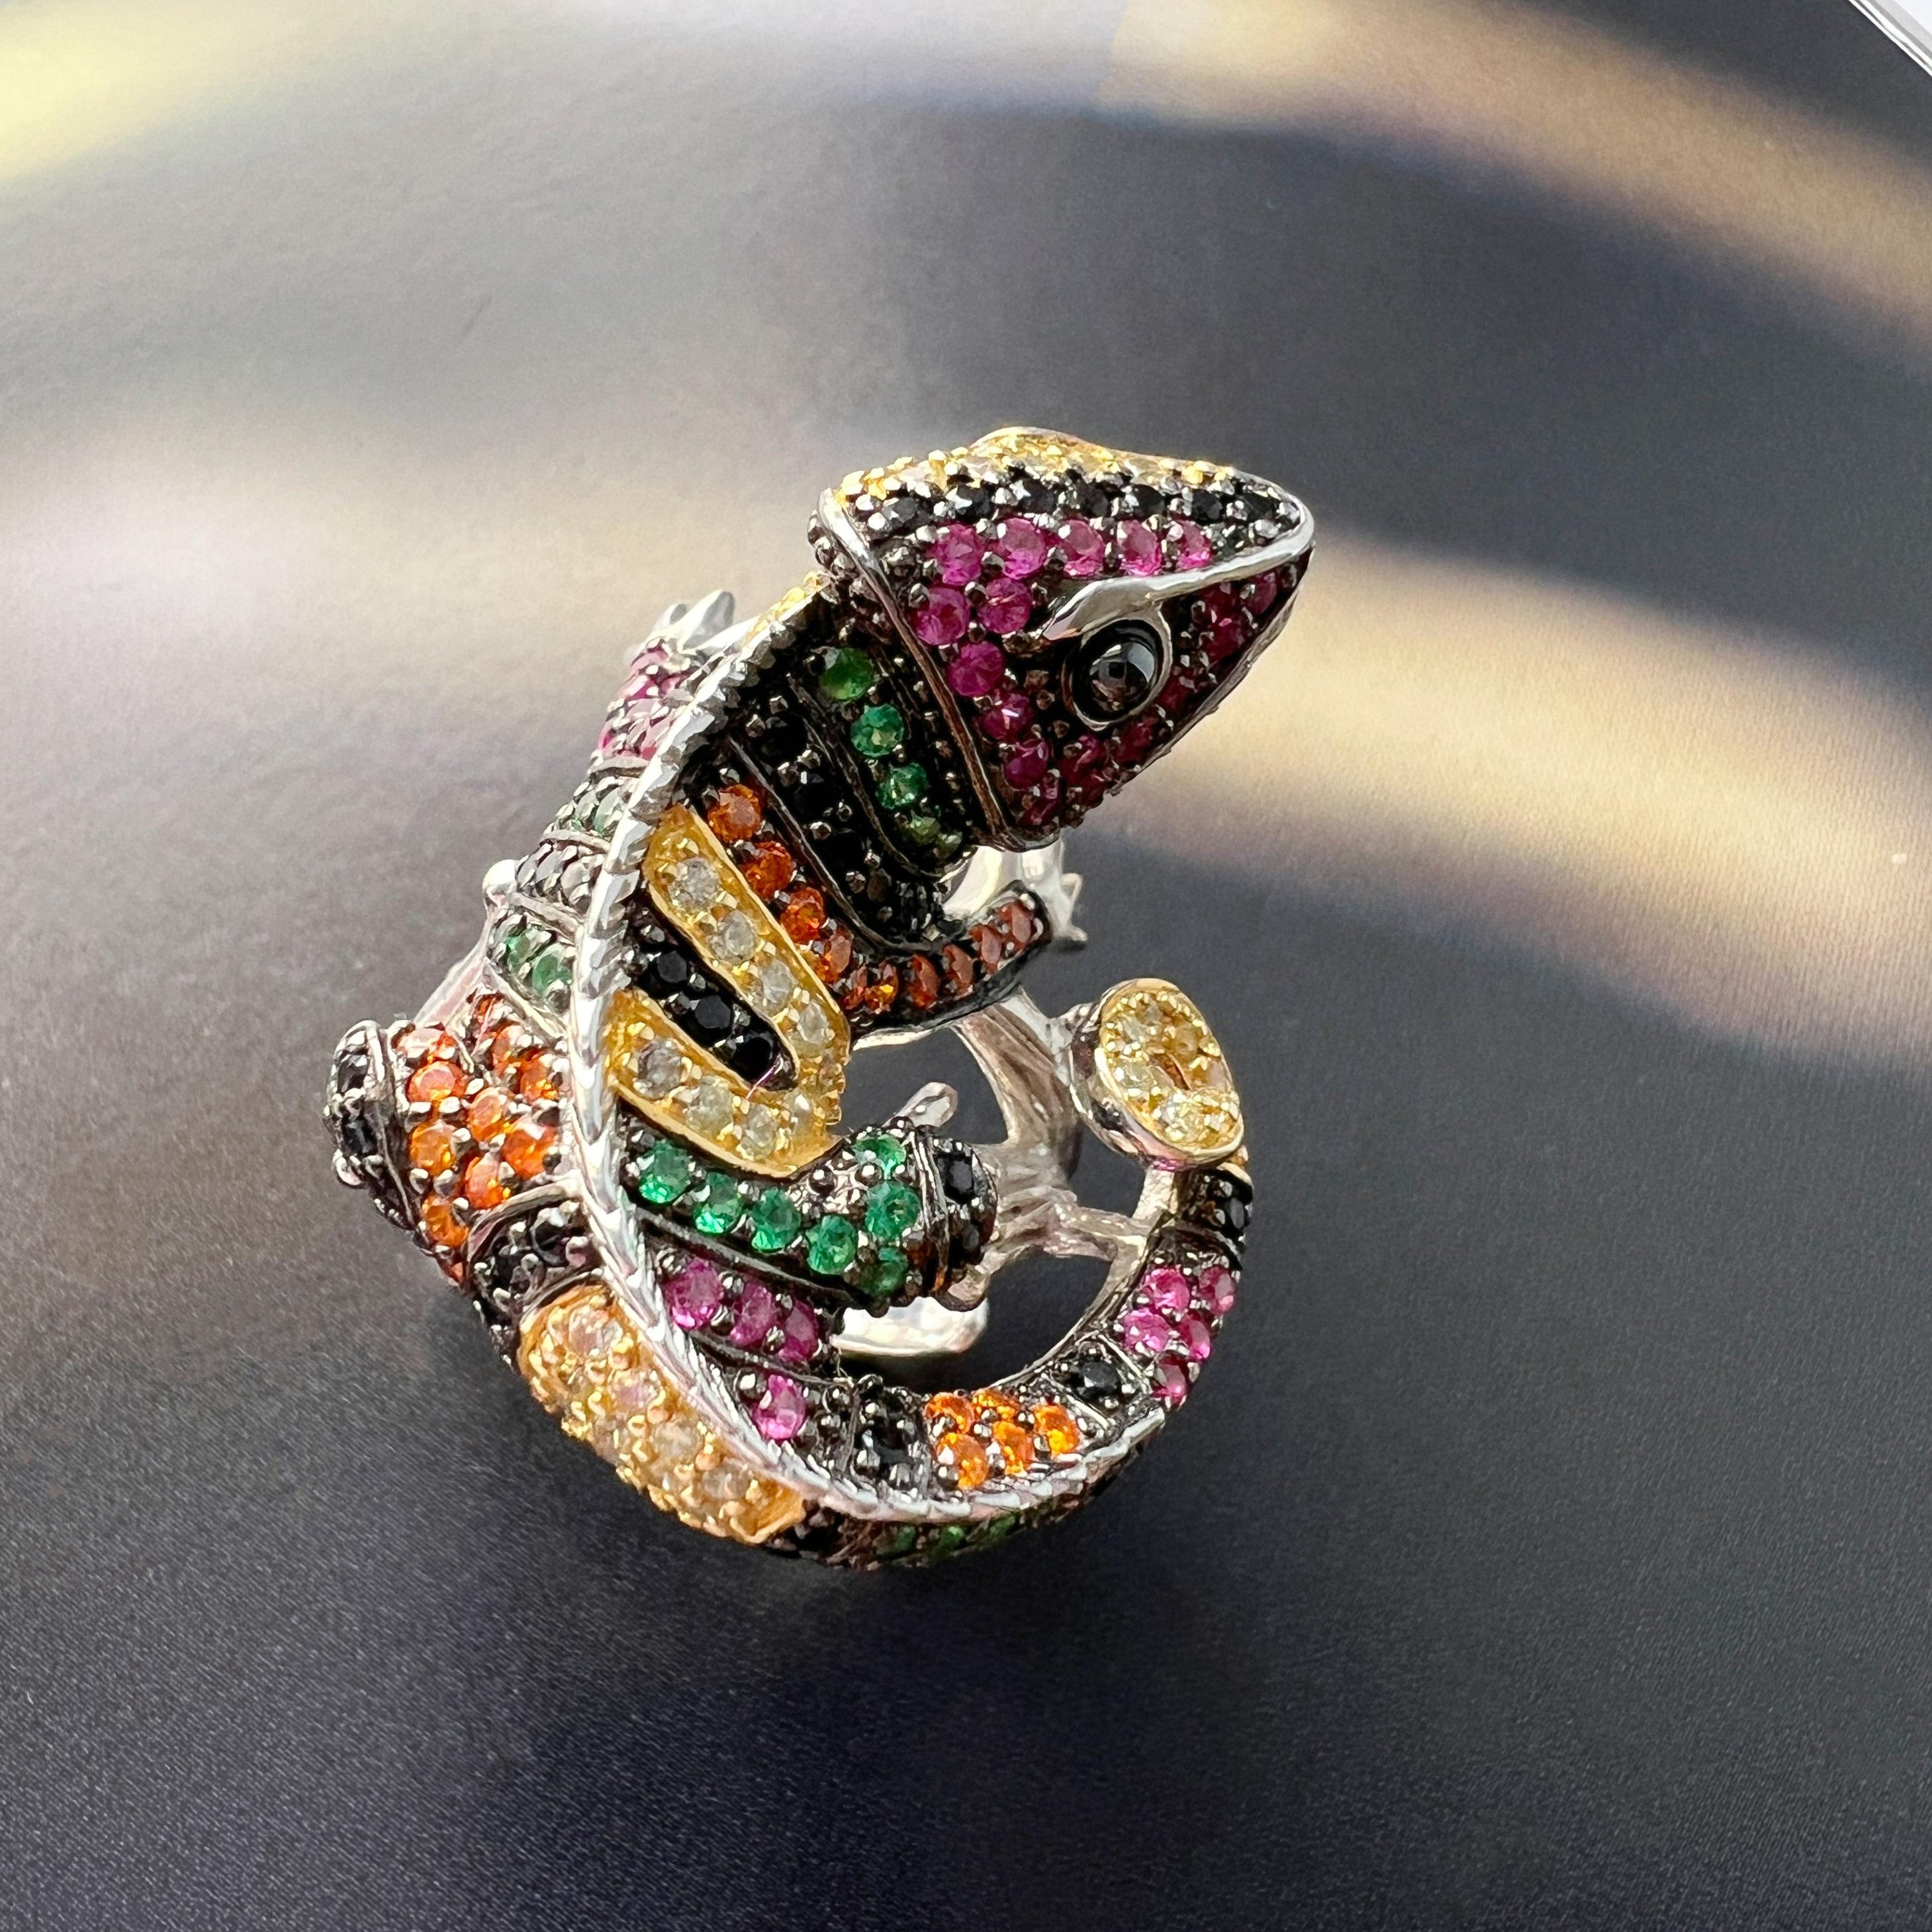 For sale a vintage sterling silver cocktail ring adorned with a delightful lizard.

The adorable lizard is intricately crafted with meticulous attention to detail. Each scale on its back, the curve of its twisted tail, and the piercing eyes are